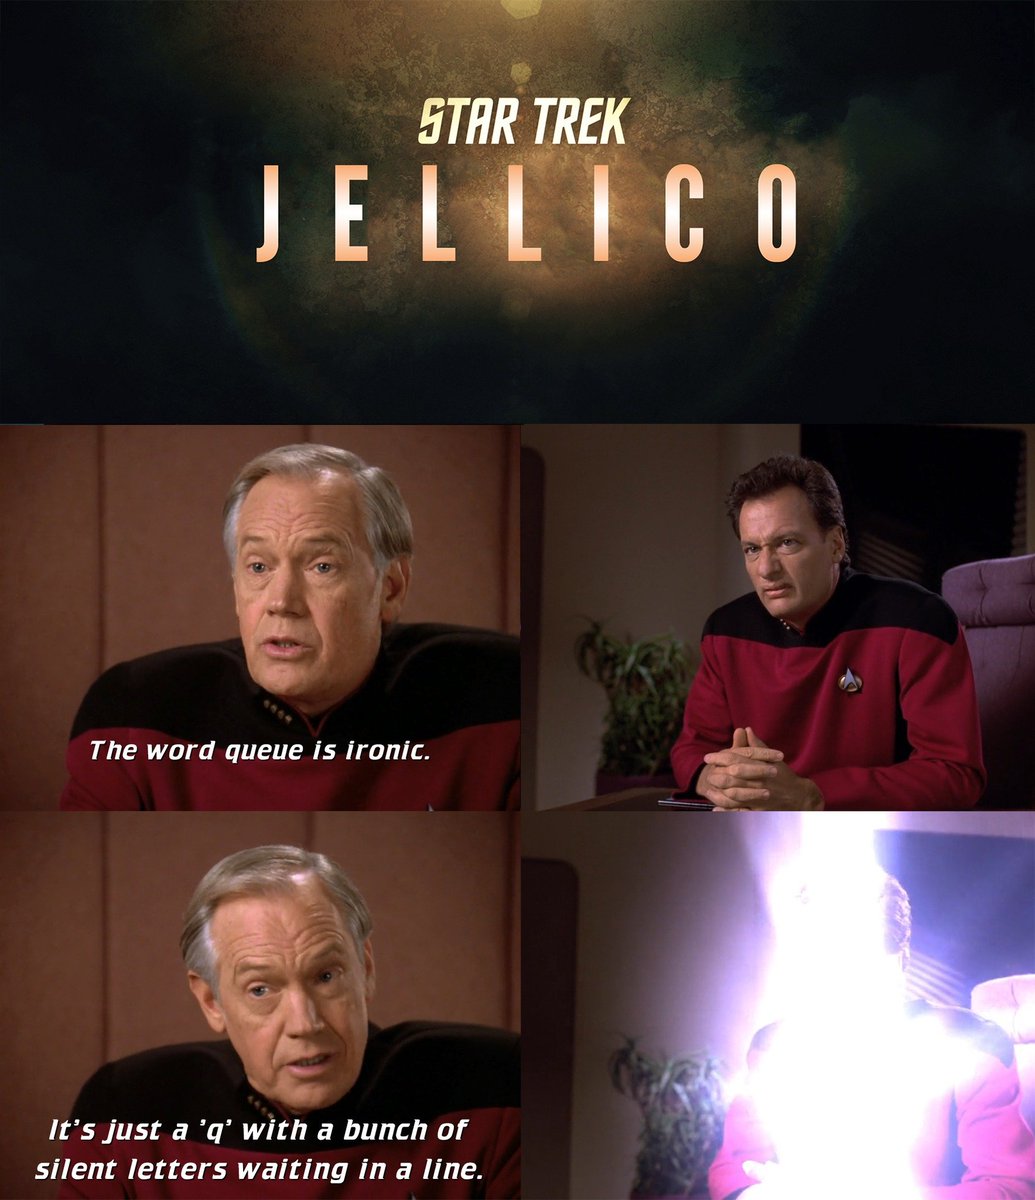 Oh don't be like that, Q. Come back! #StarTrek #JellicoTrek